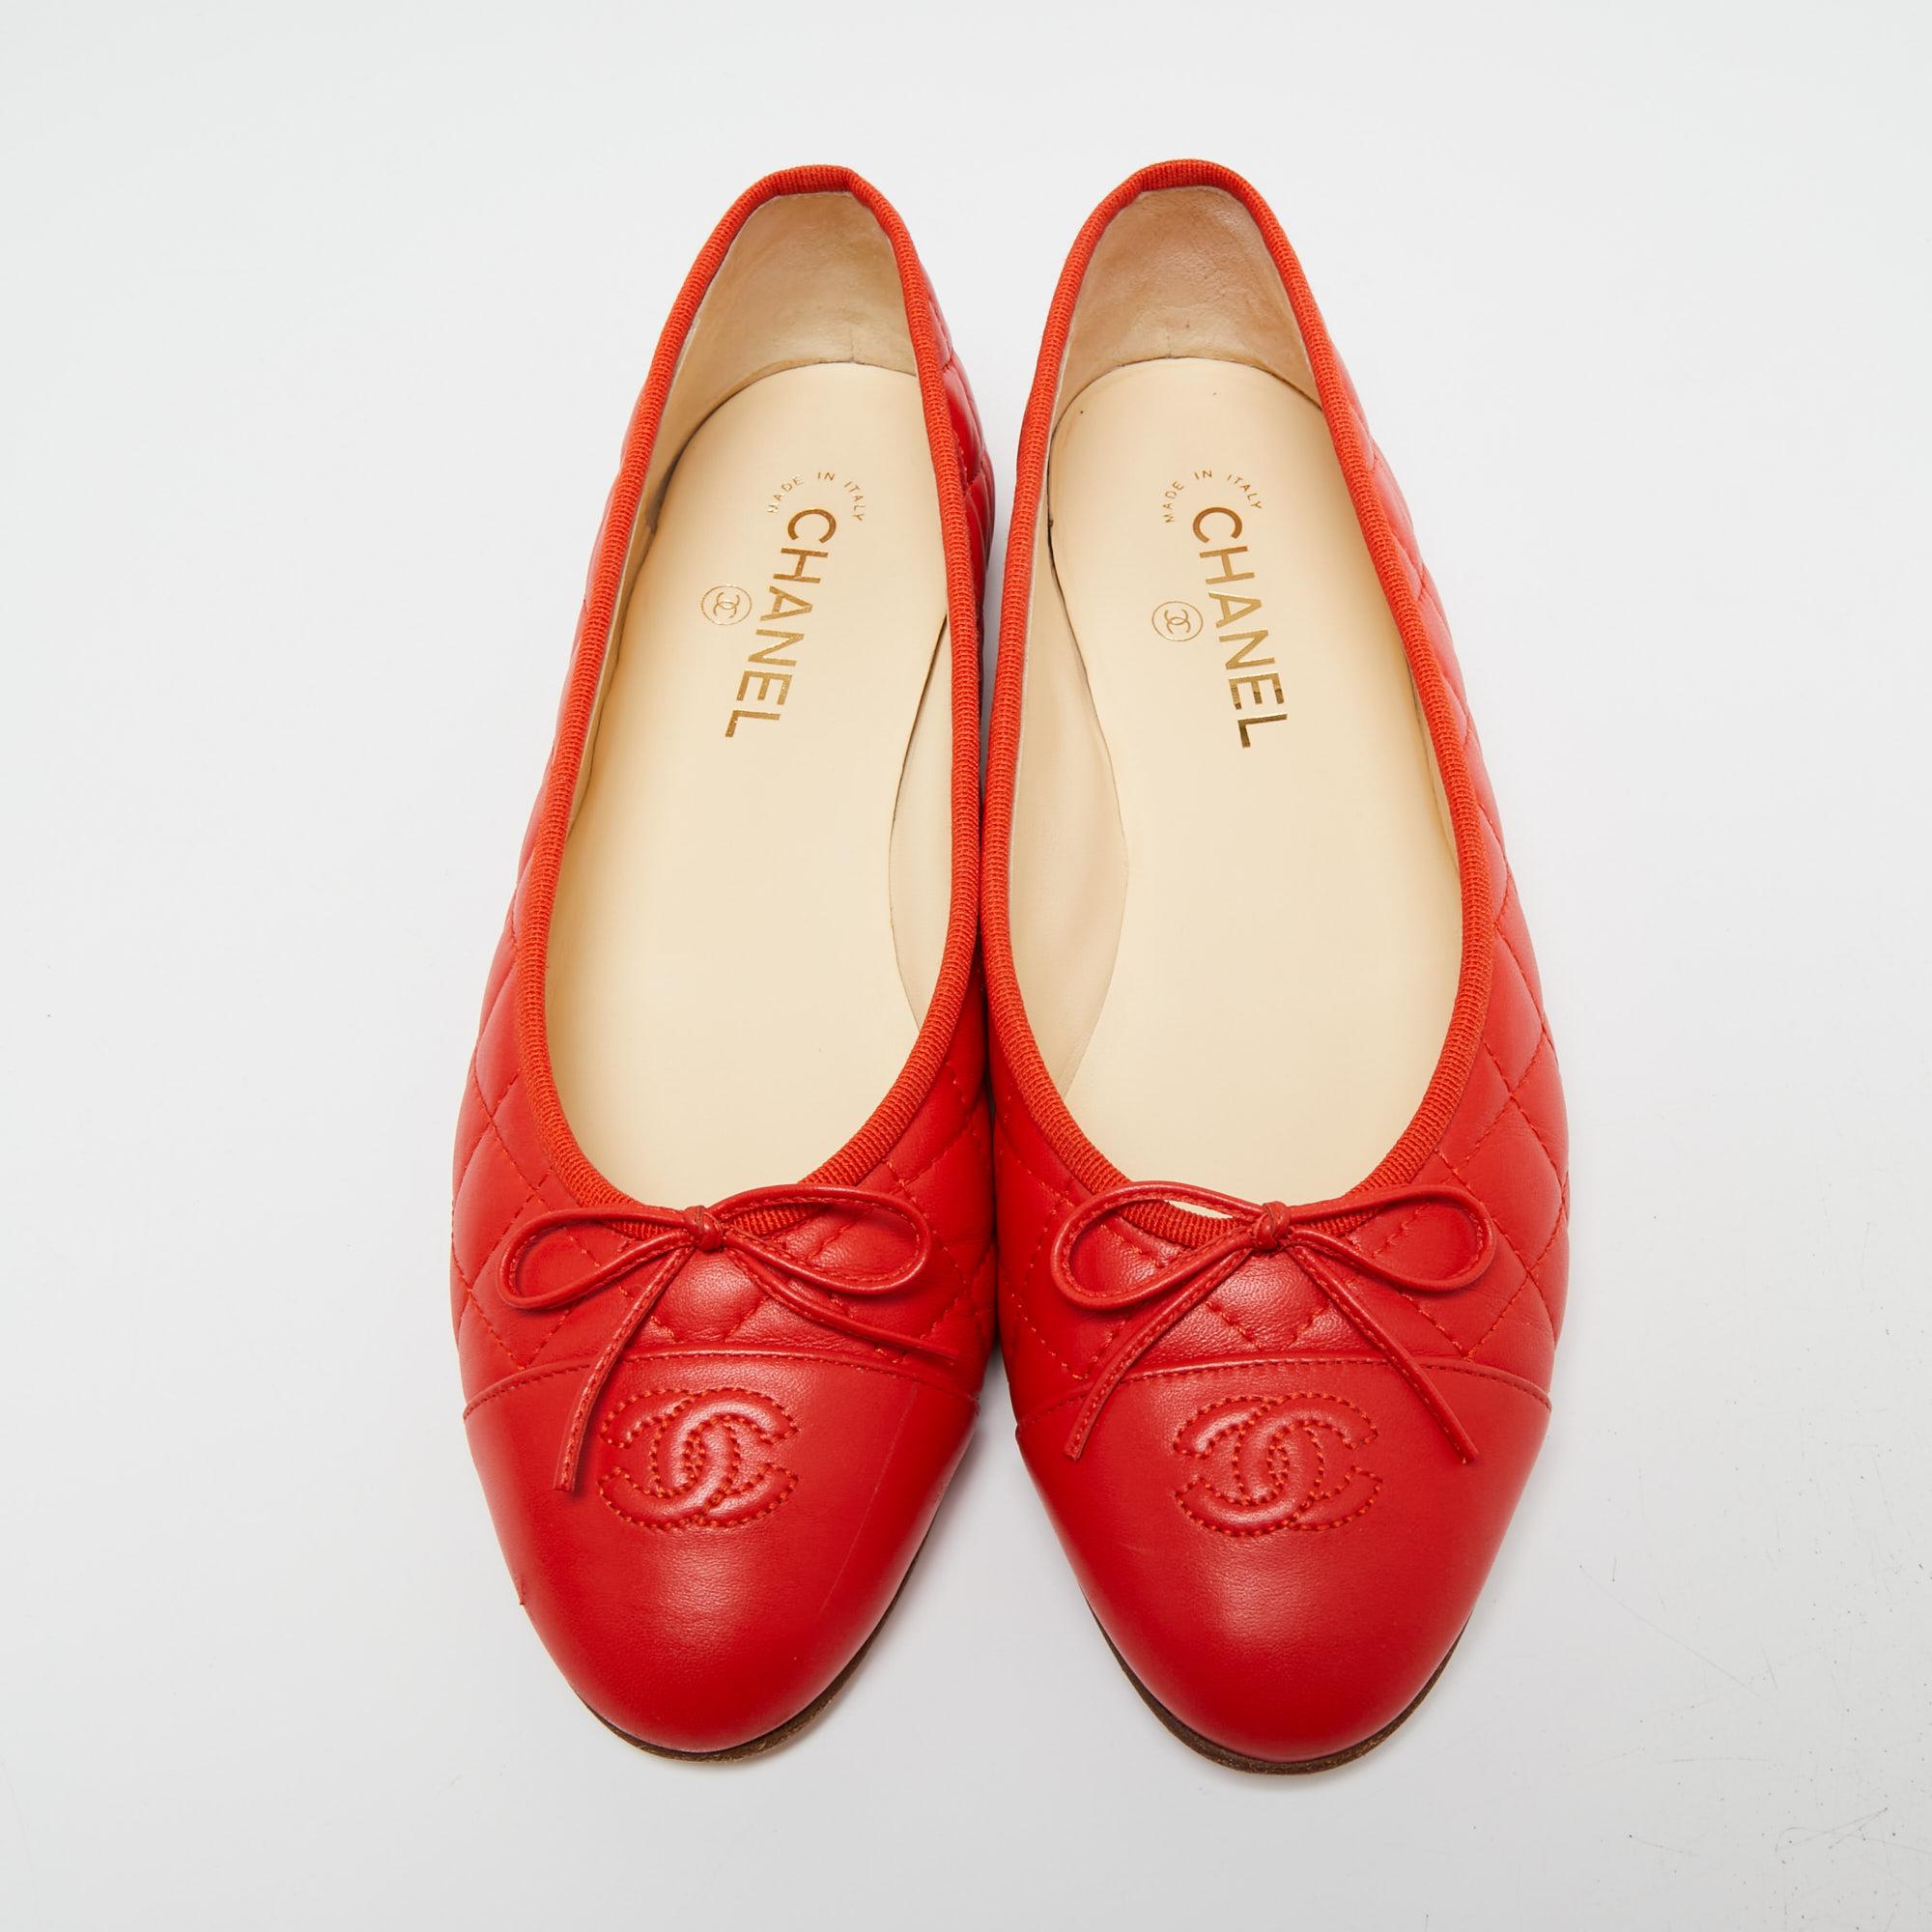 These minimal Chanel ballet flats are perfect for long hours of use and just chic enough to wear to work. Constructed using quilted leather, these shoes feature tonal cap toes with the signature CC detail and little bow detail for that distinct